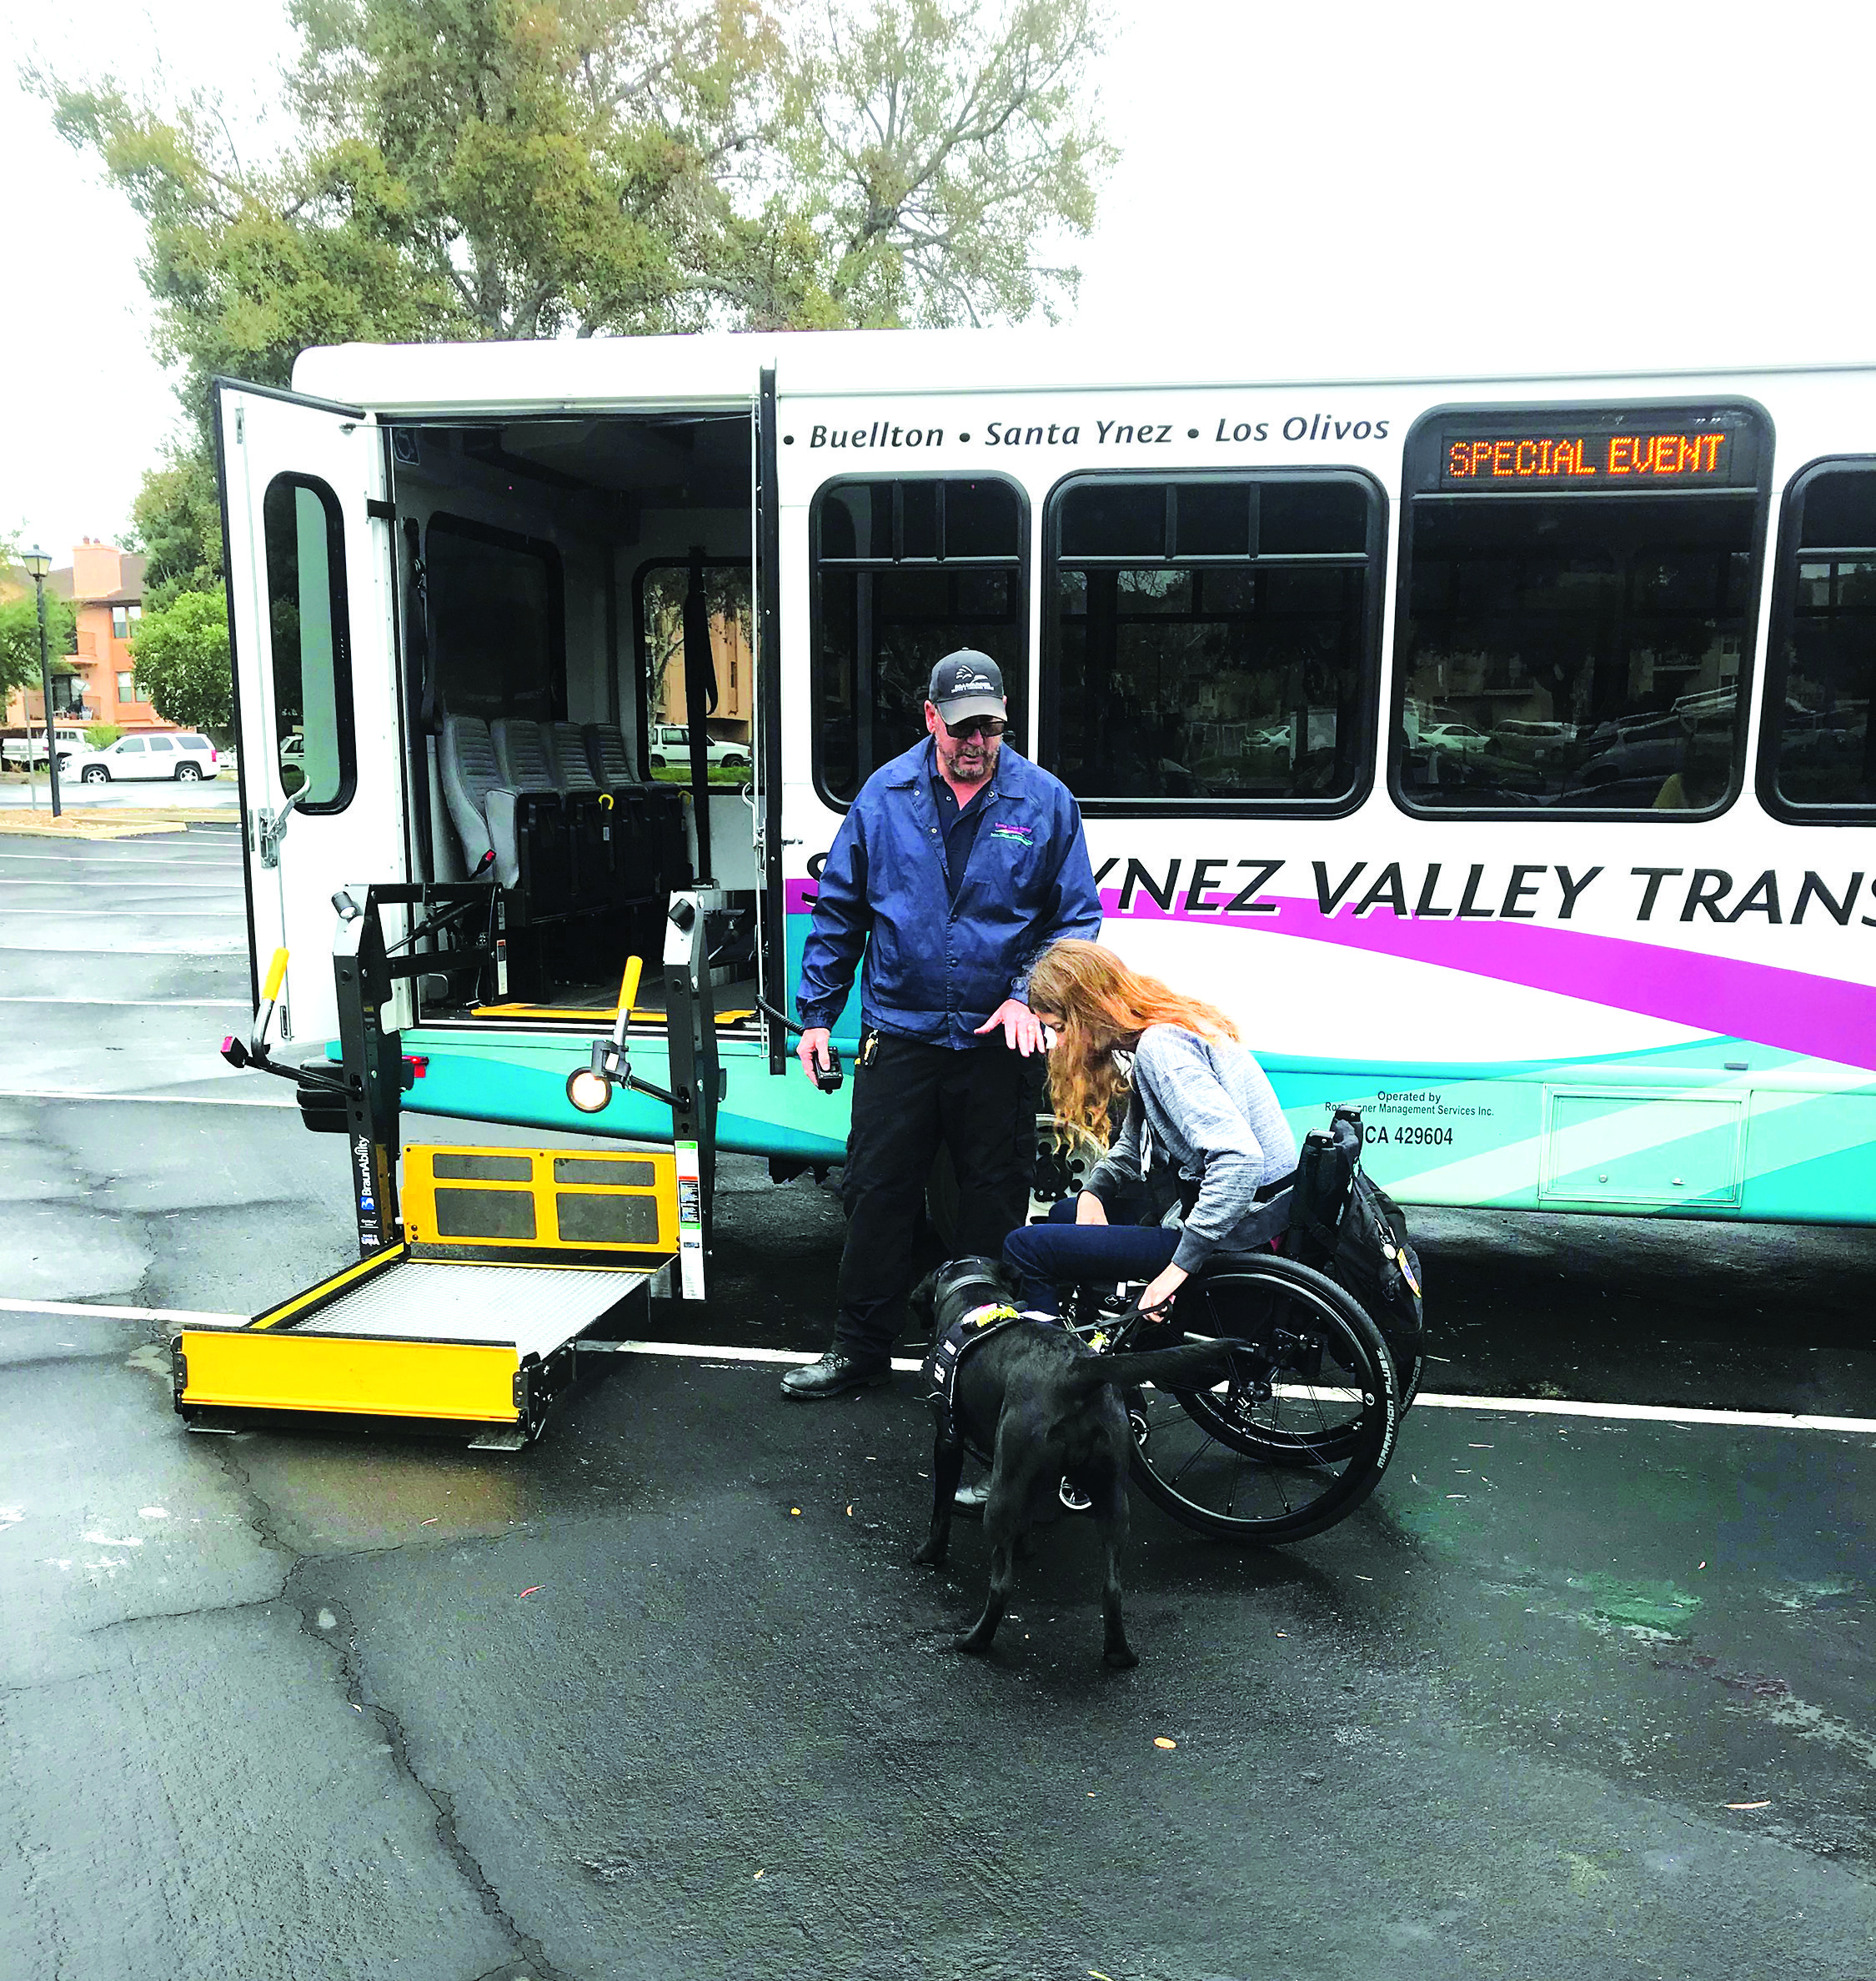 SYV Transit returns to full service and implements COVID-19 safety precautions